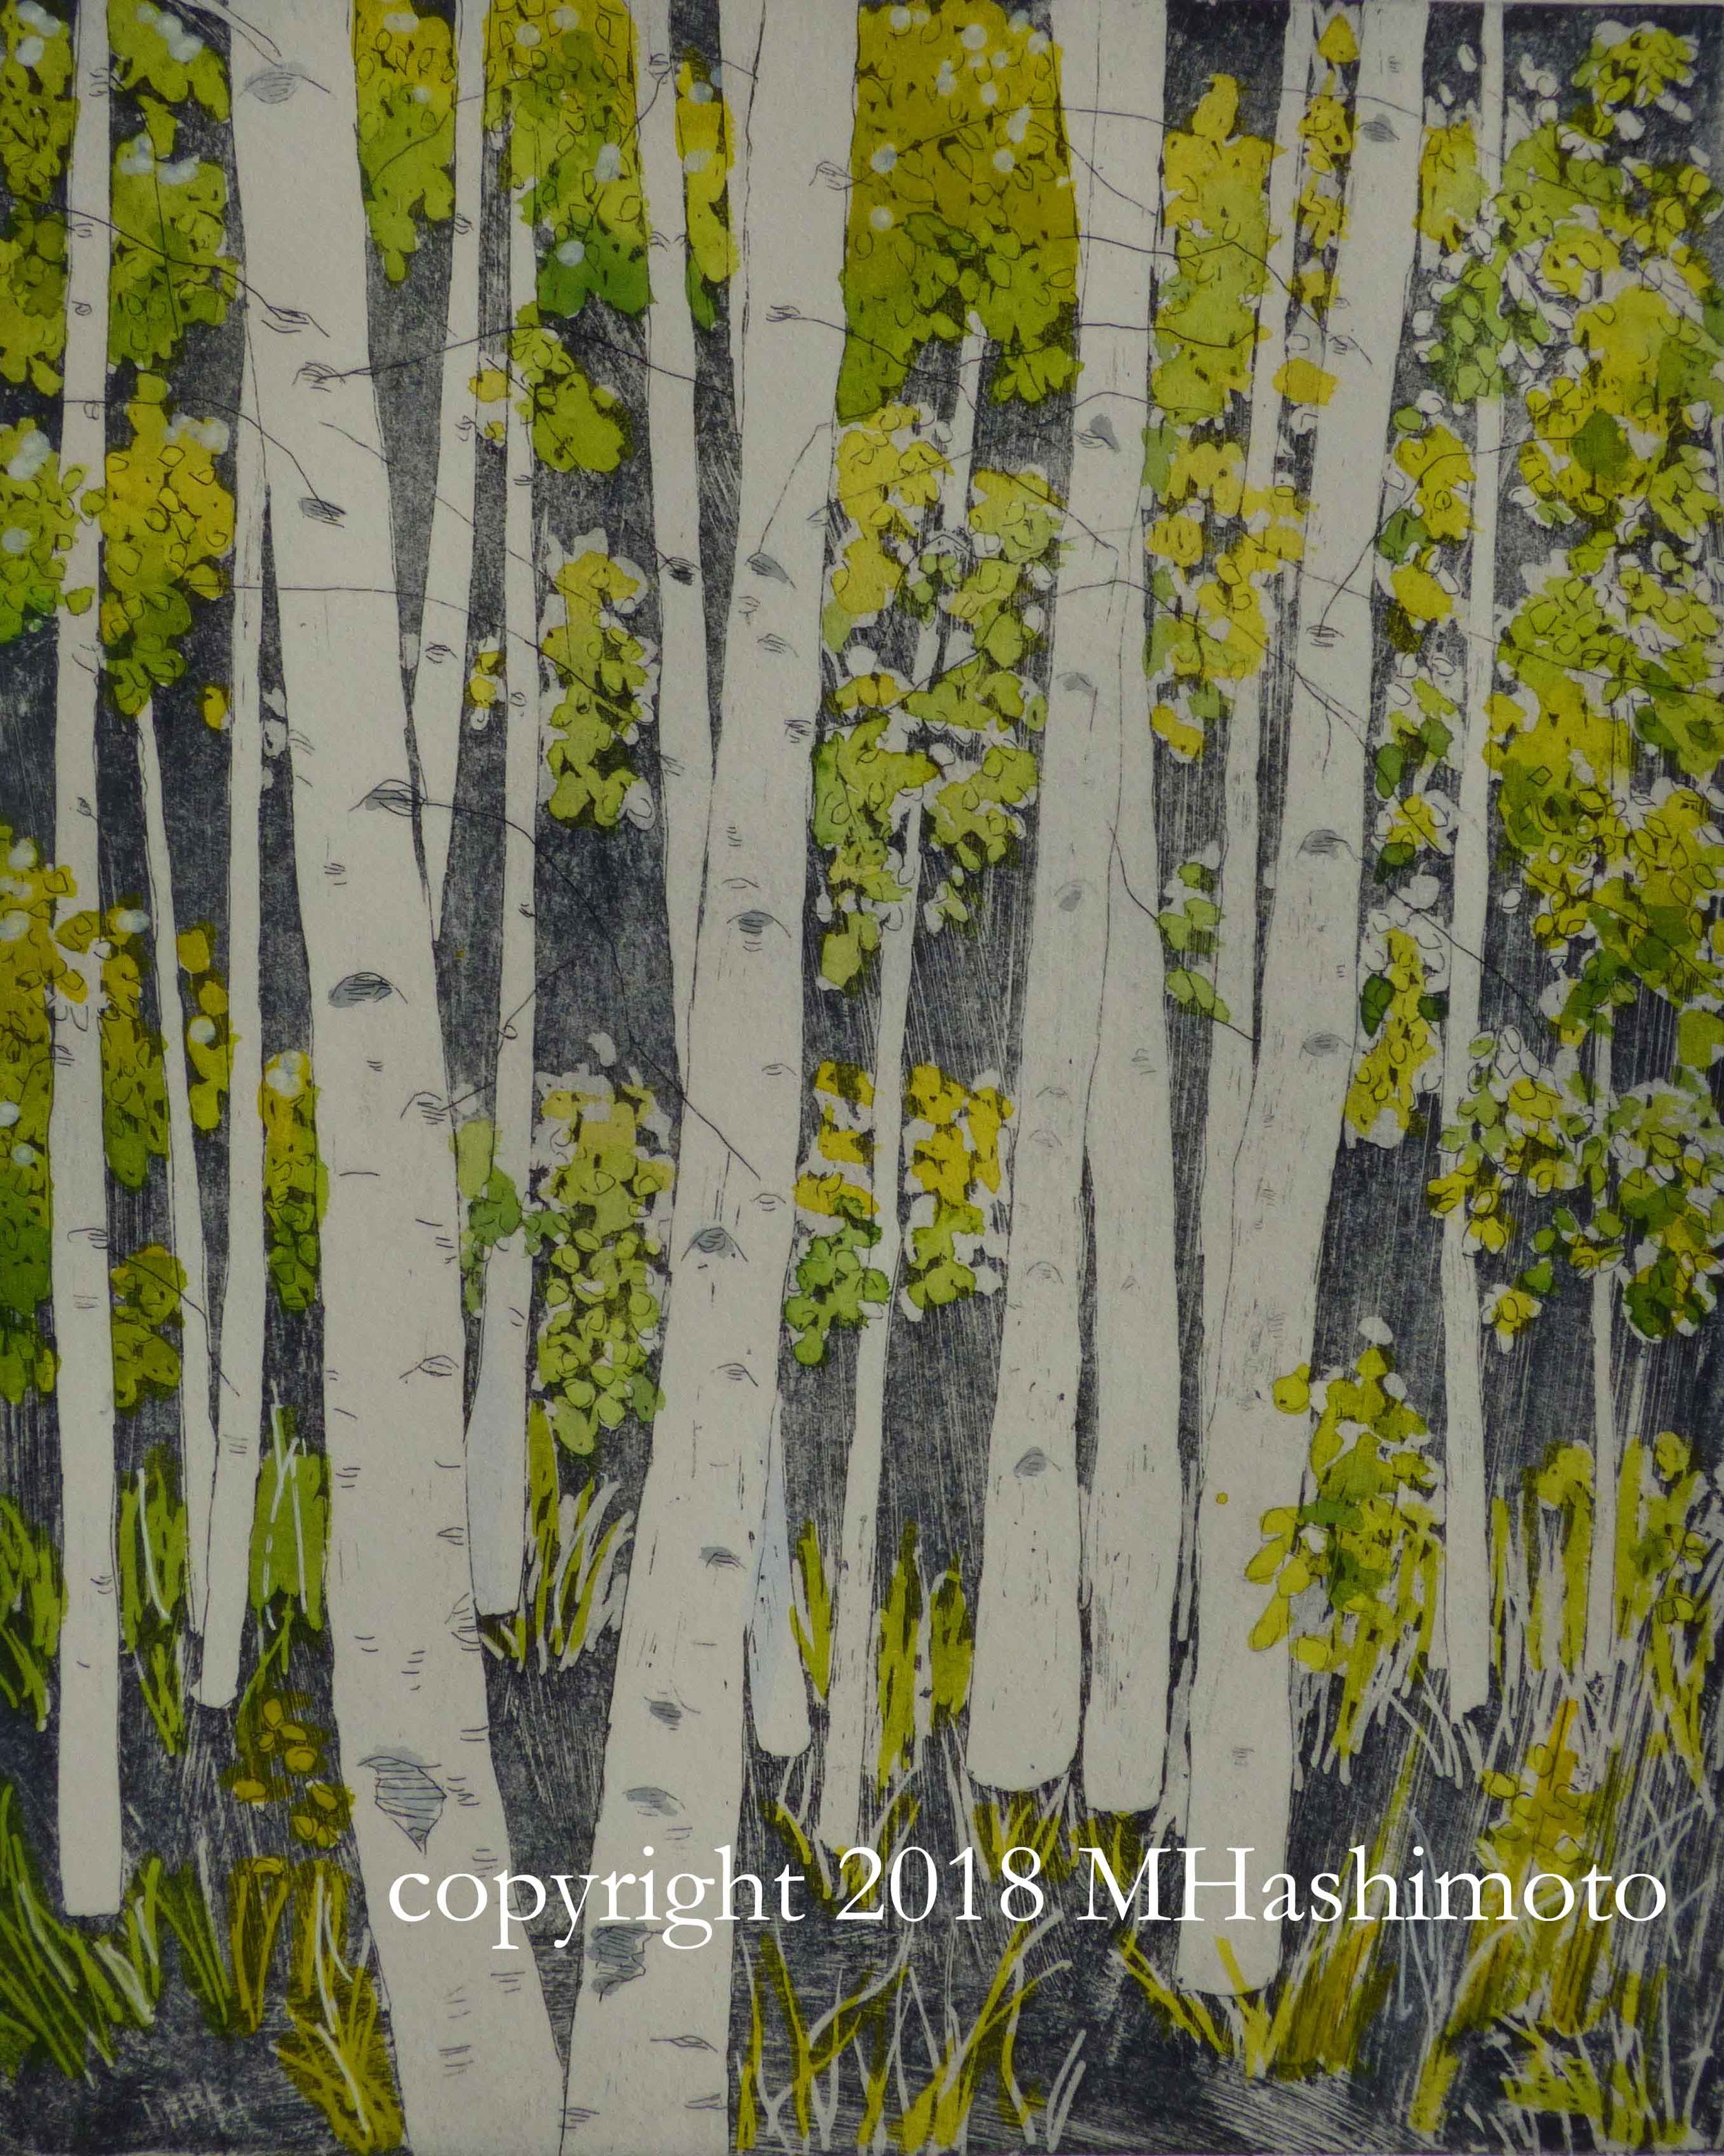 Aspens, hand-tinted with watercolor